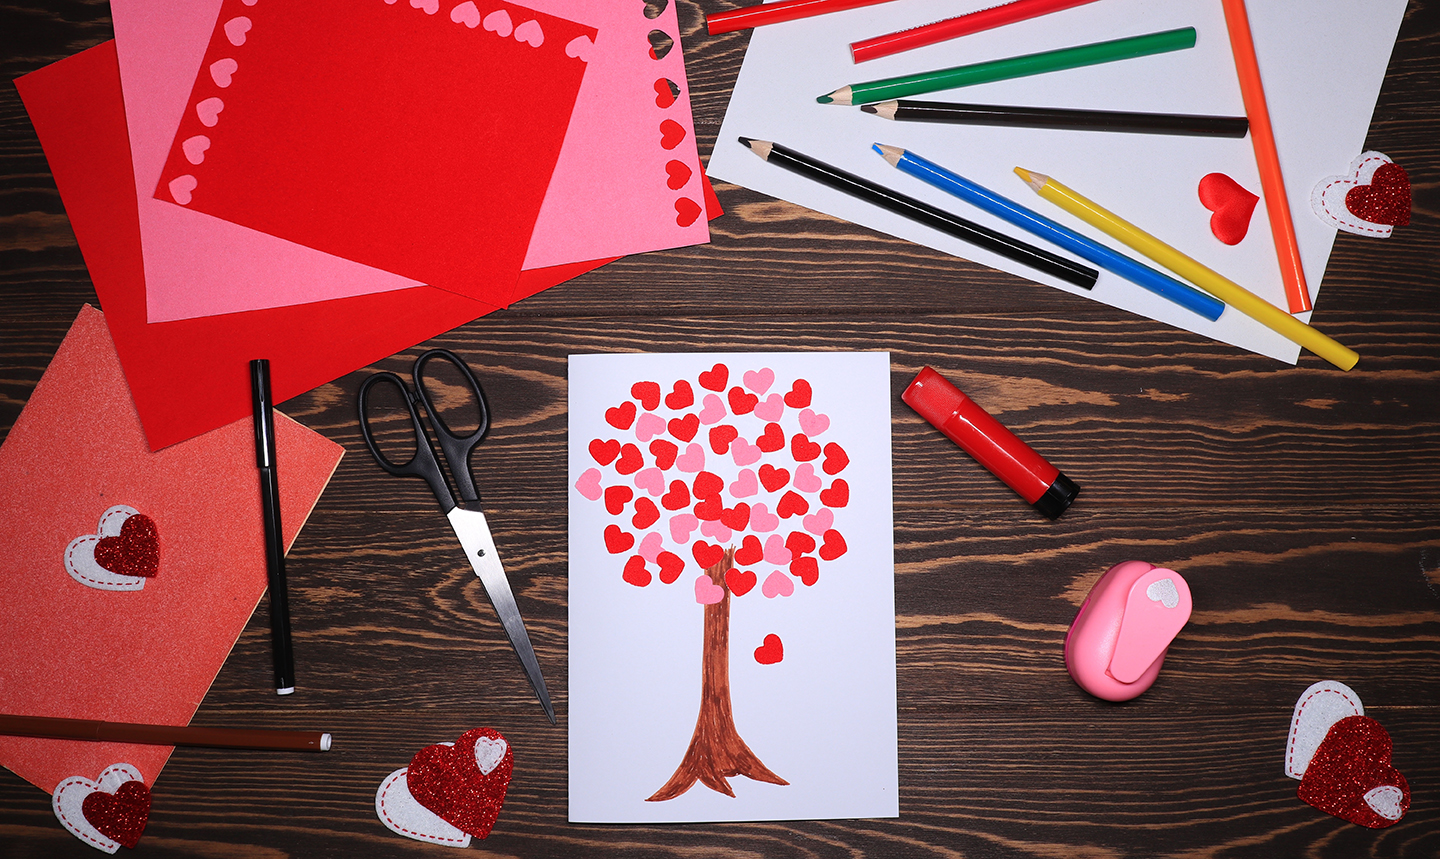 A piece of paper with a tree drawn on it and paper hearts for the leaves. In the background are craft supplies such as coloured paper, pencil crayons, scissors, and a heart punch. 